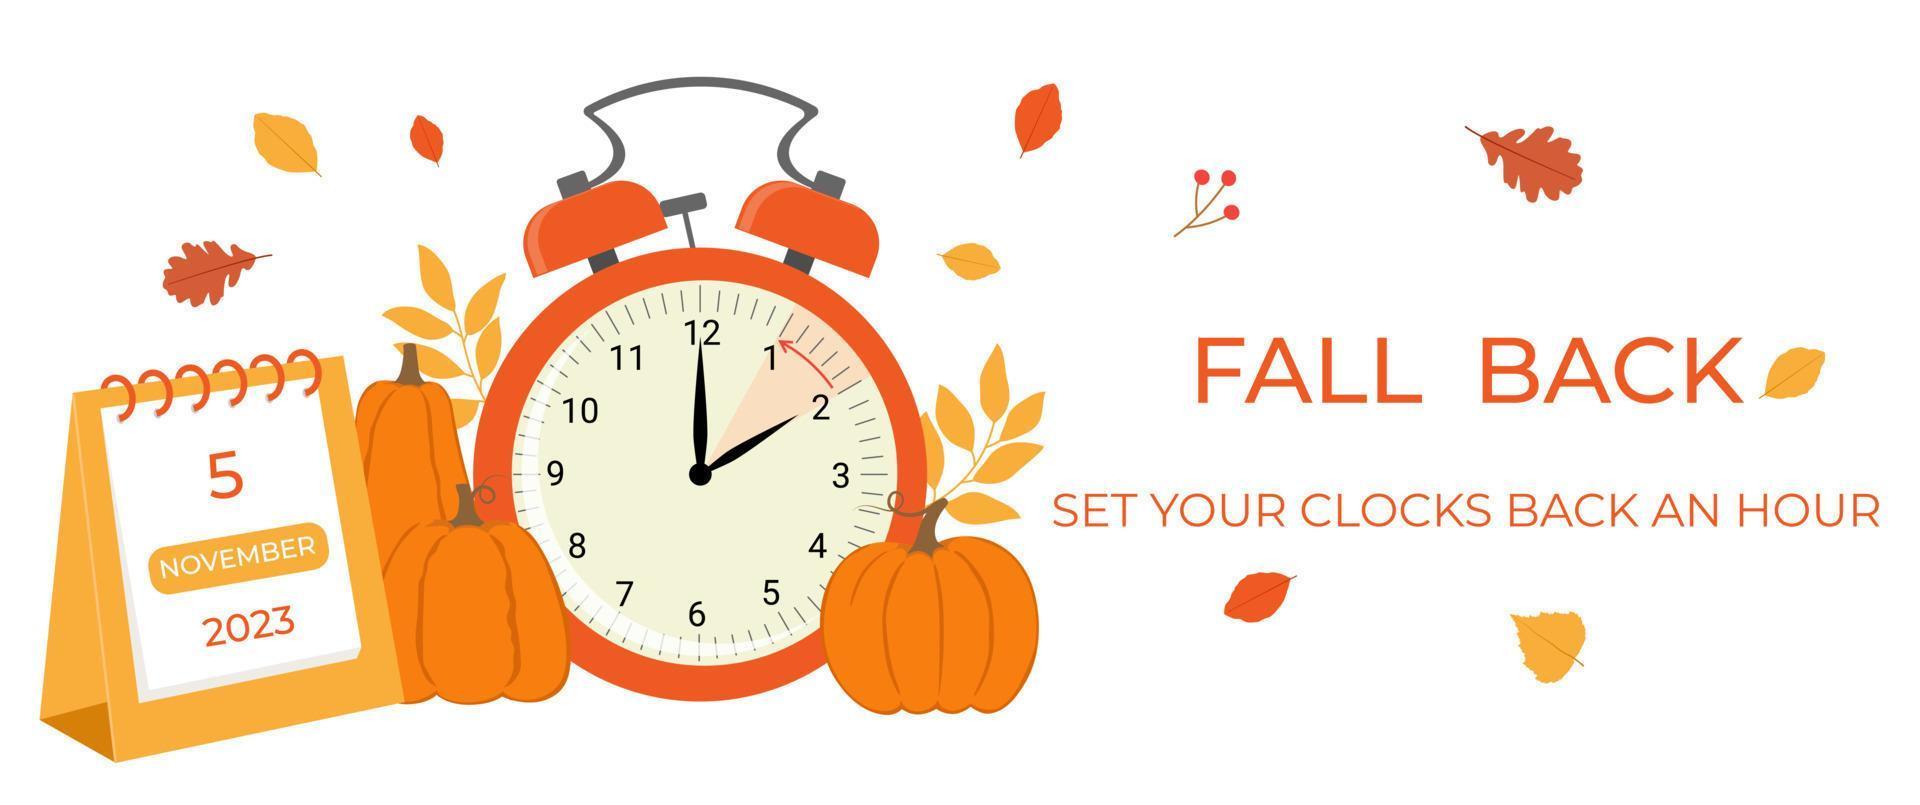 Daylight saving time ends concept banner. Fall Back time. Allarm clock with autumn leaves, pumpkins and calendar vector